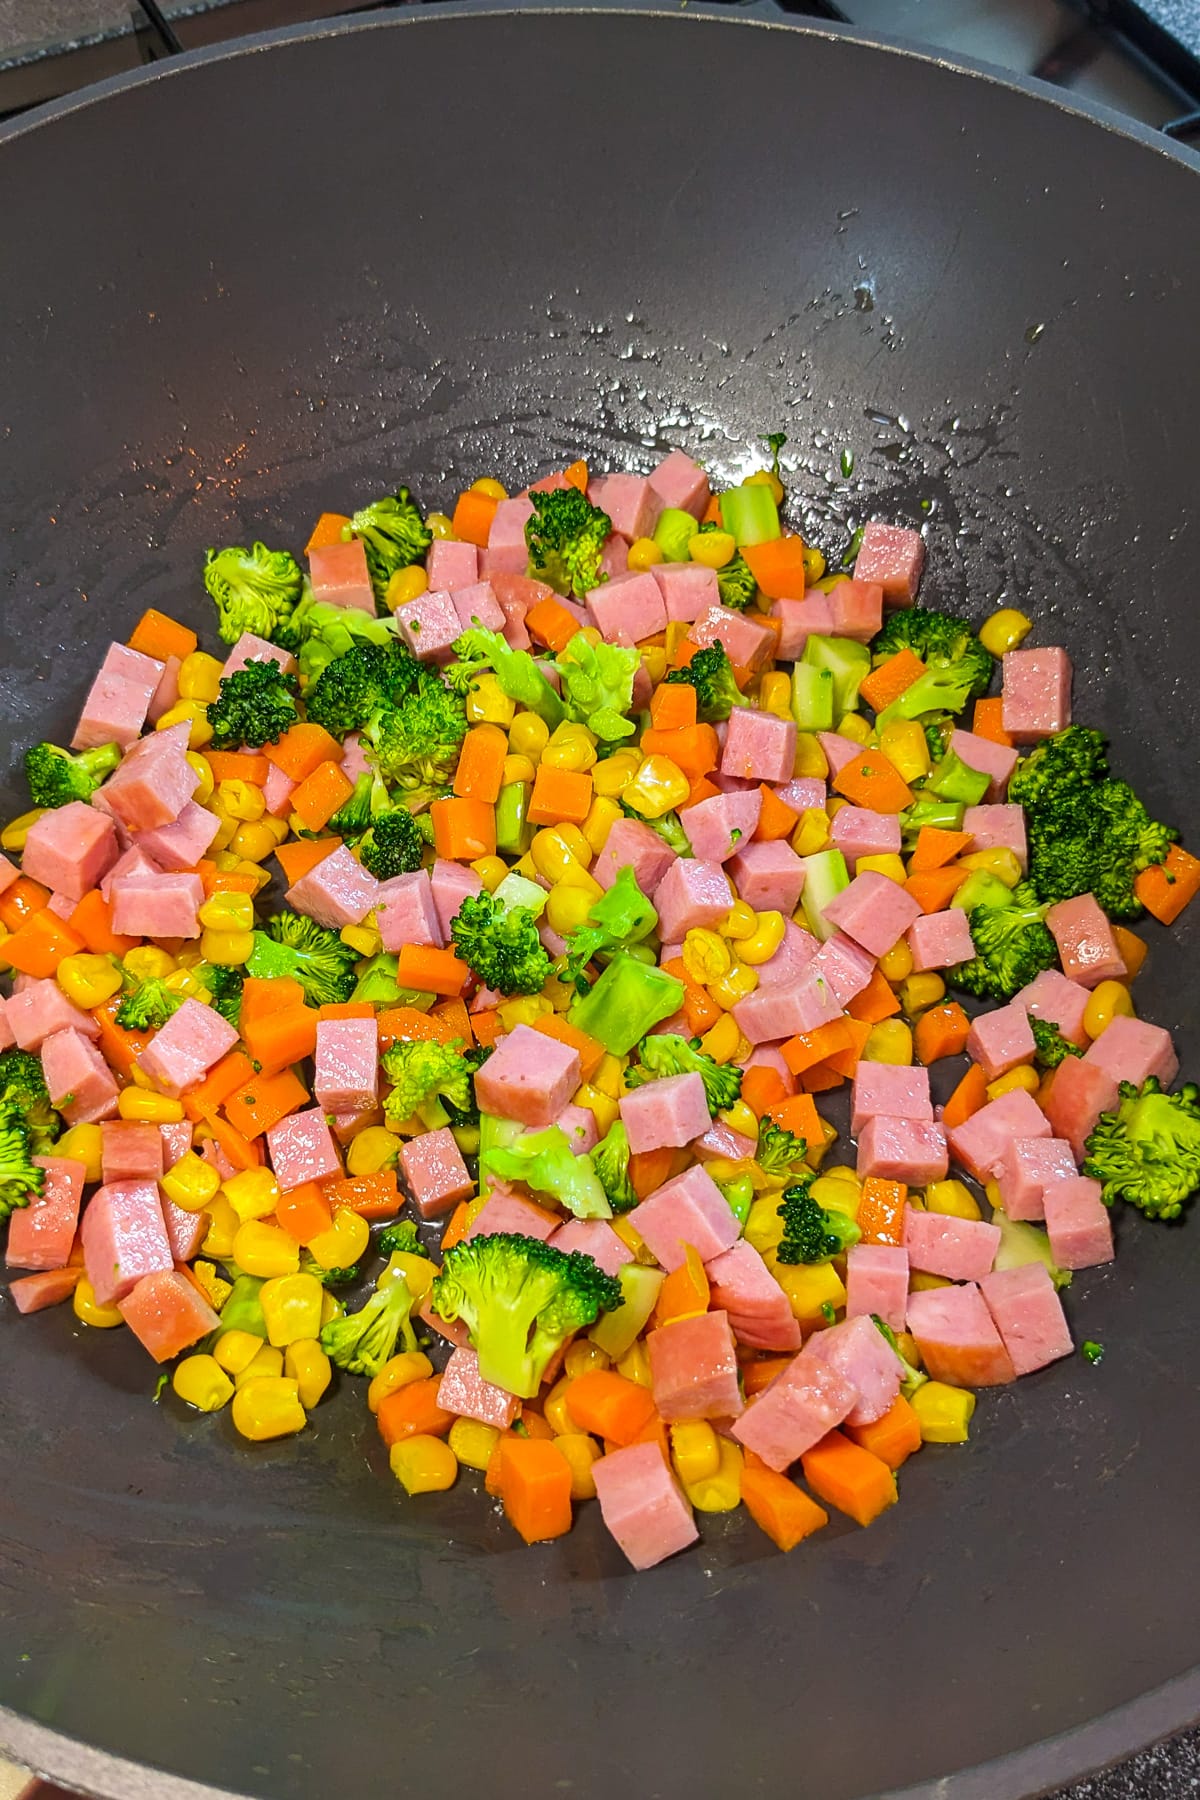 Wok with fried veggies and luncheon meat.